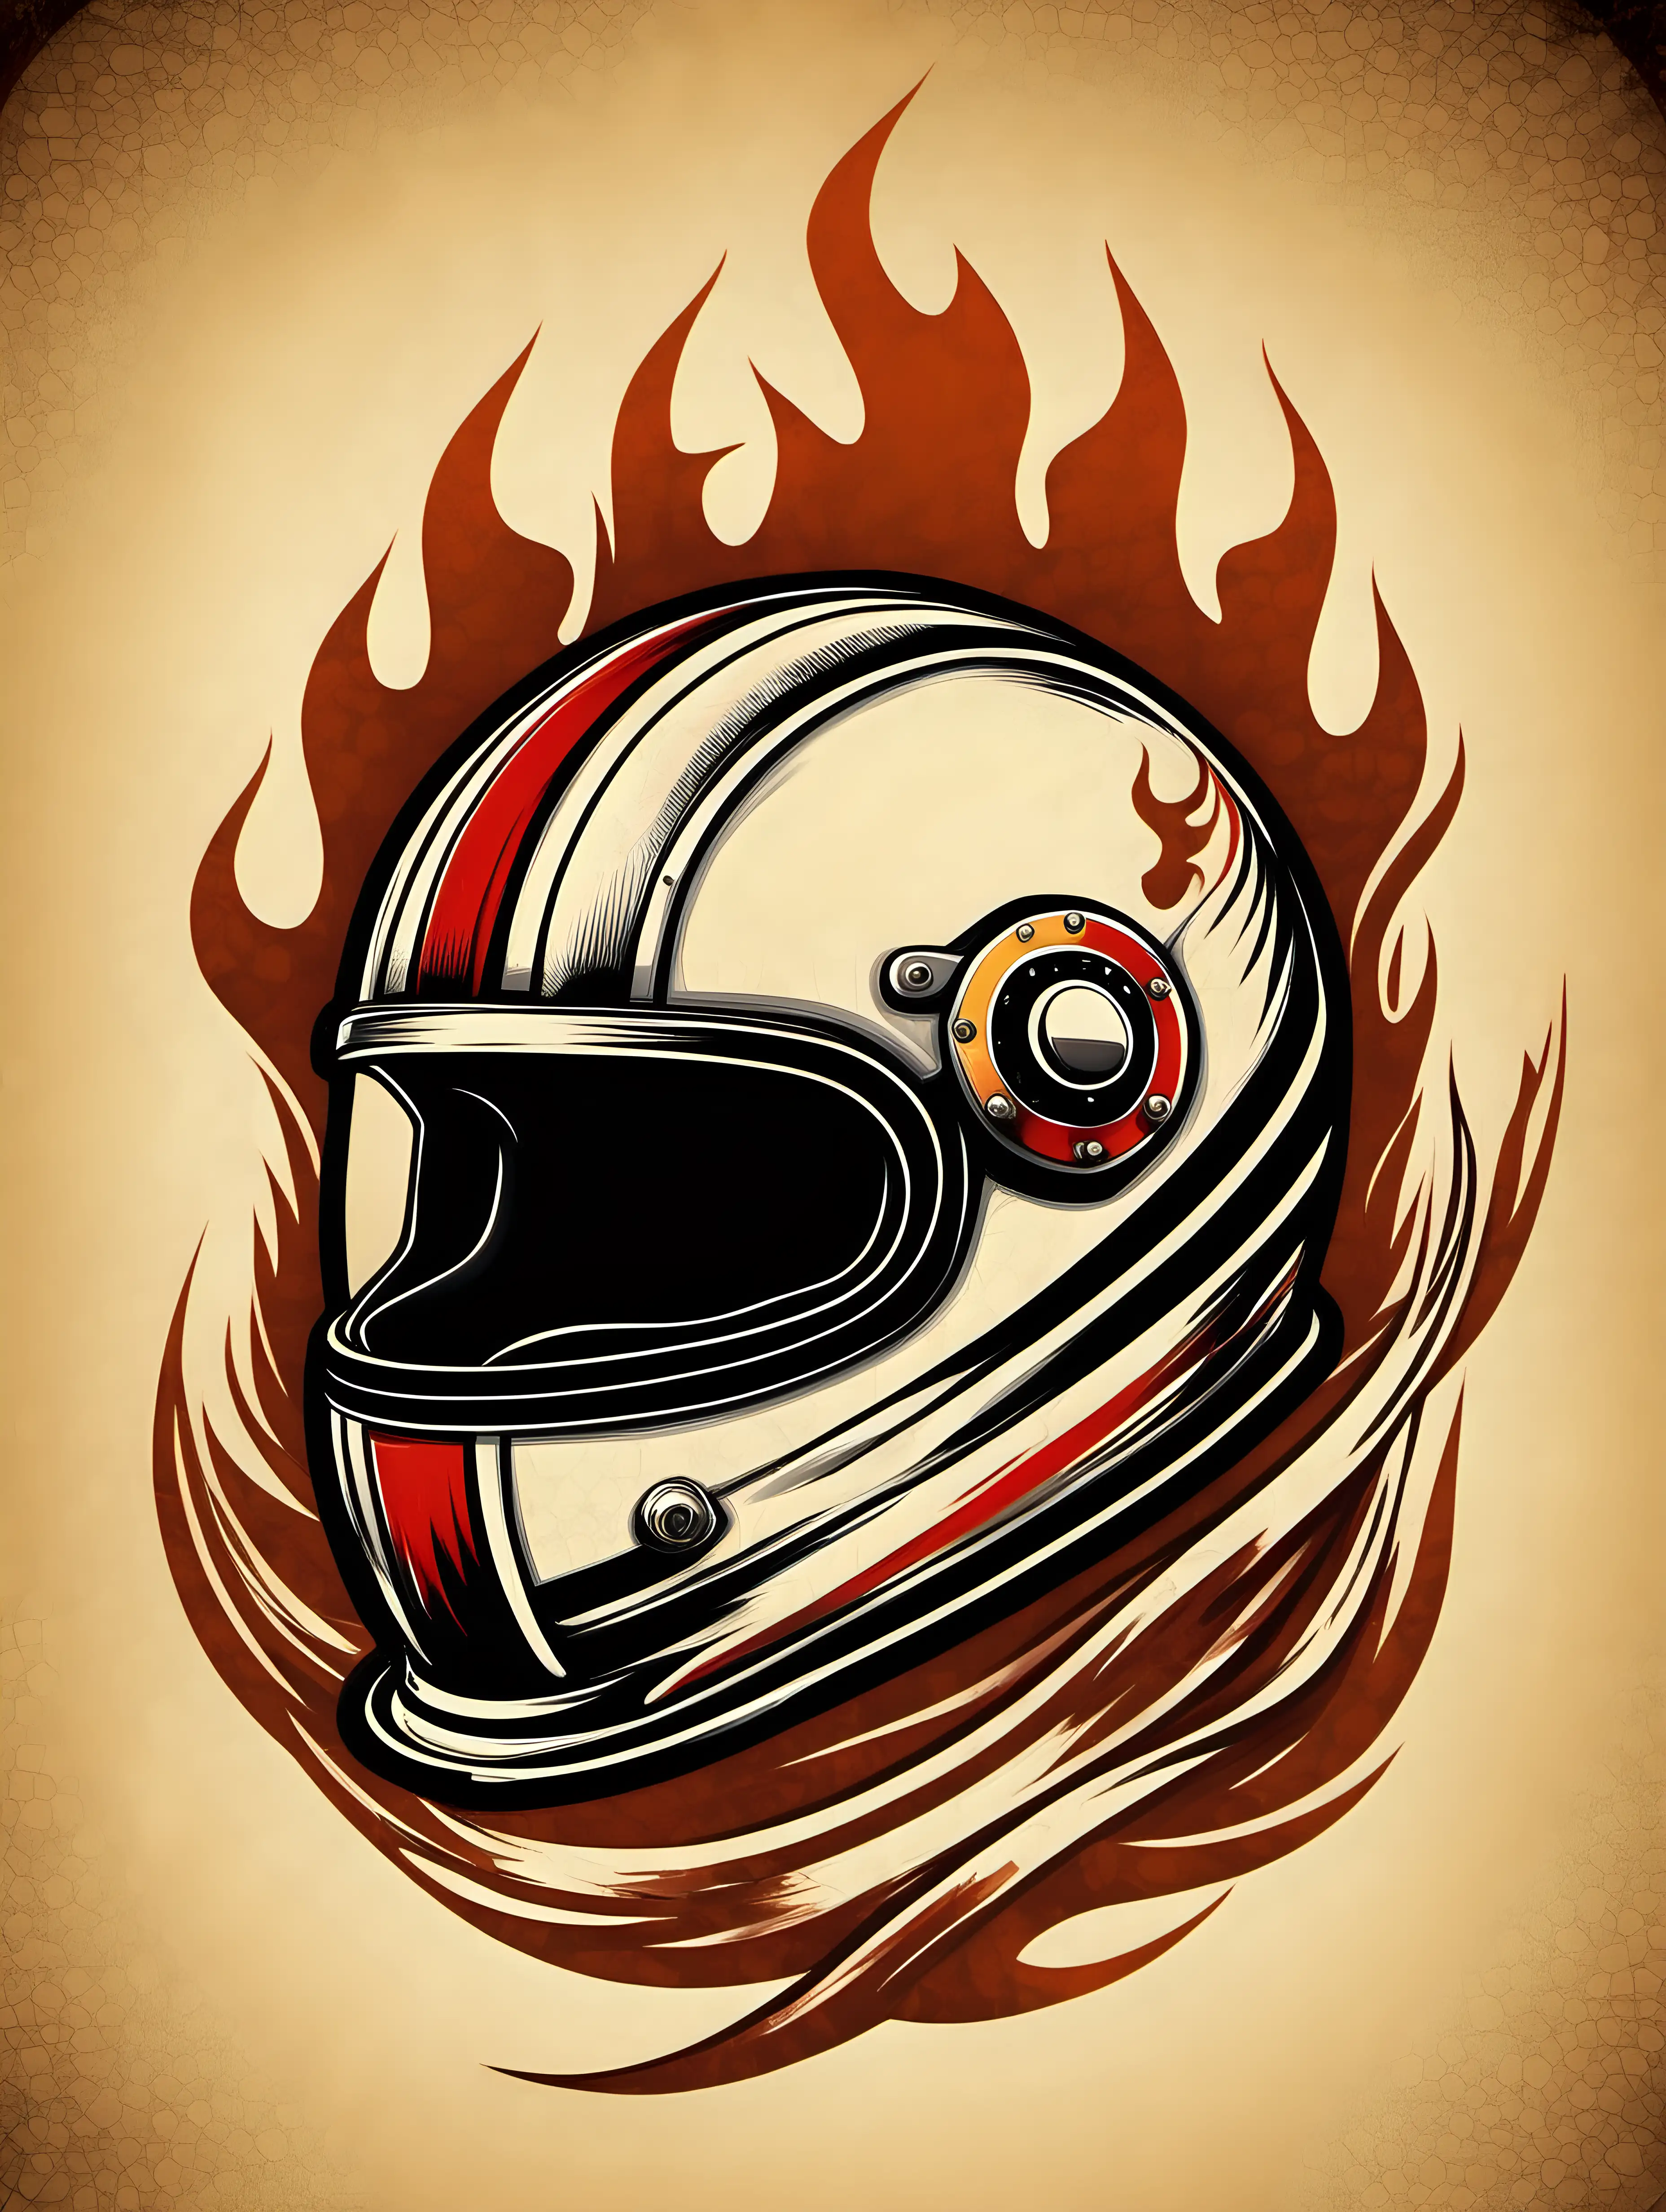 racing helmet in vintage style draw with racing flag and flames